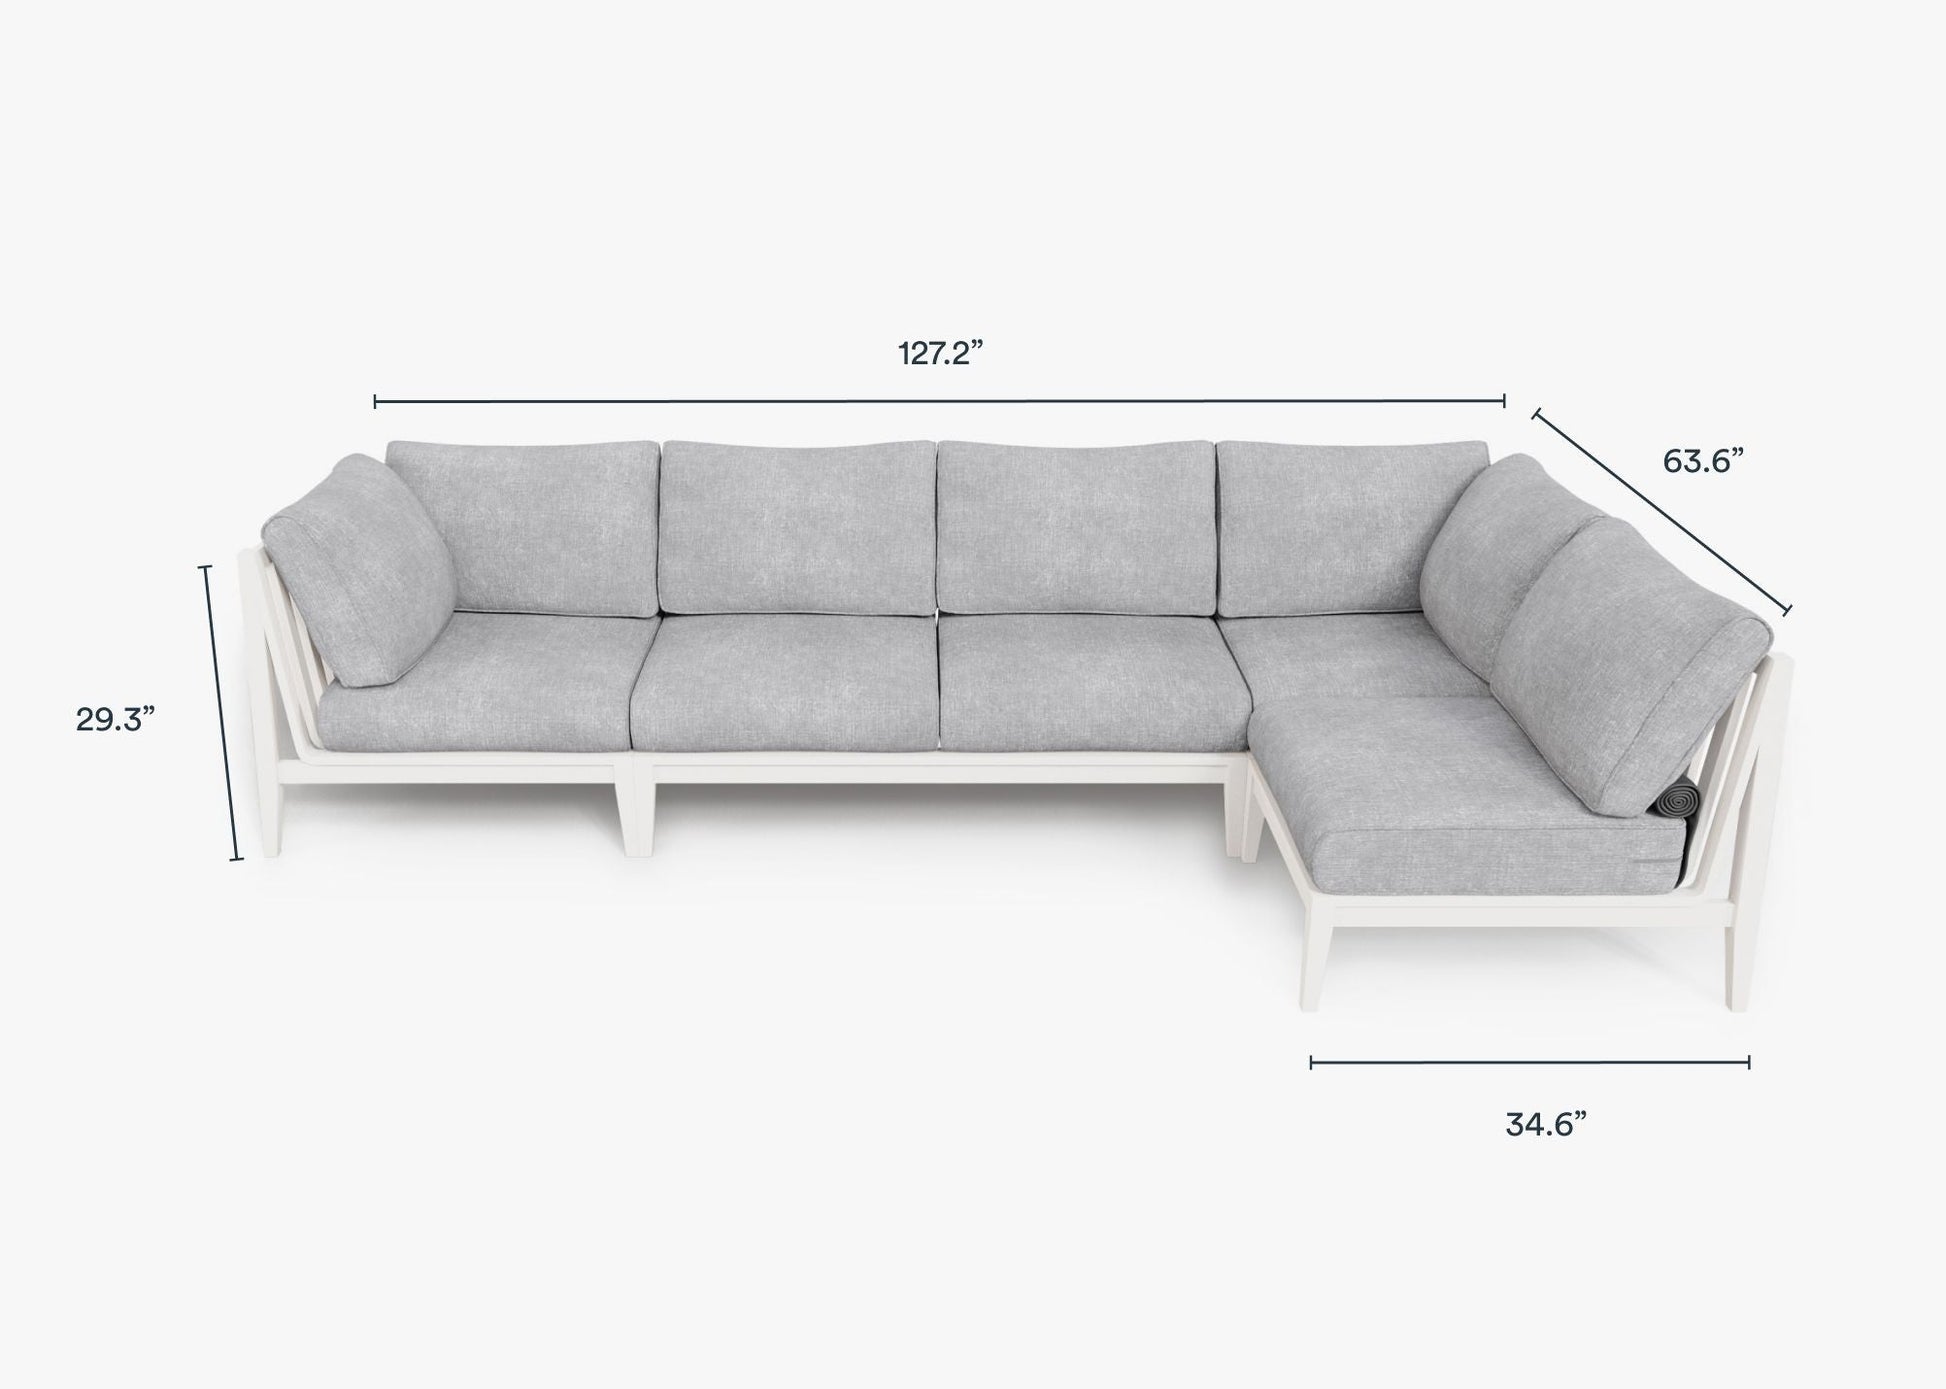 Live Outer 127" x 64" White Aluminum Outdoor L Shape Sectional 5-Seat With Pacific Fog Gray Cushion